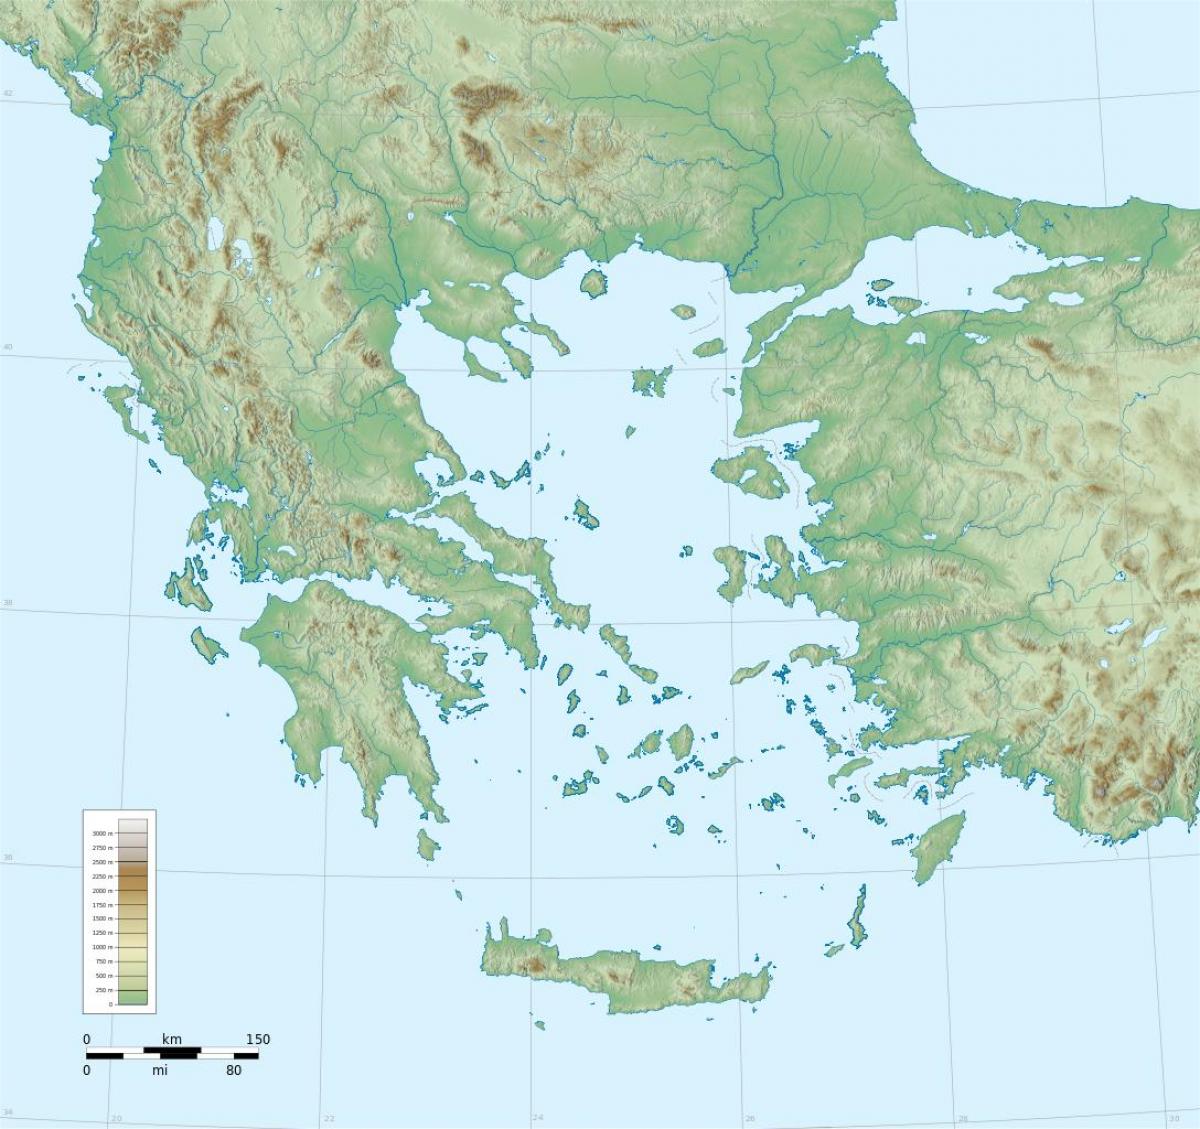 Topographical map of Greece